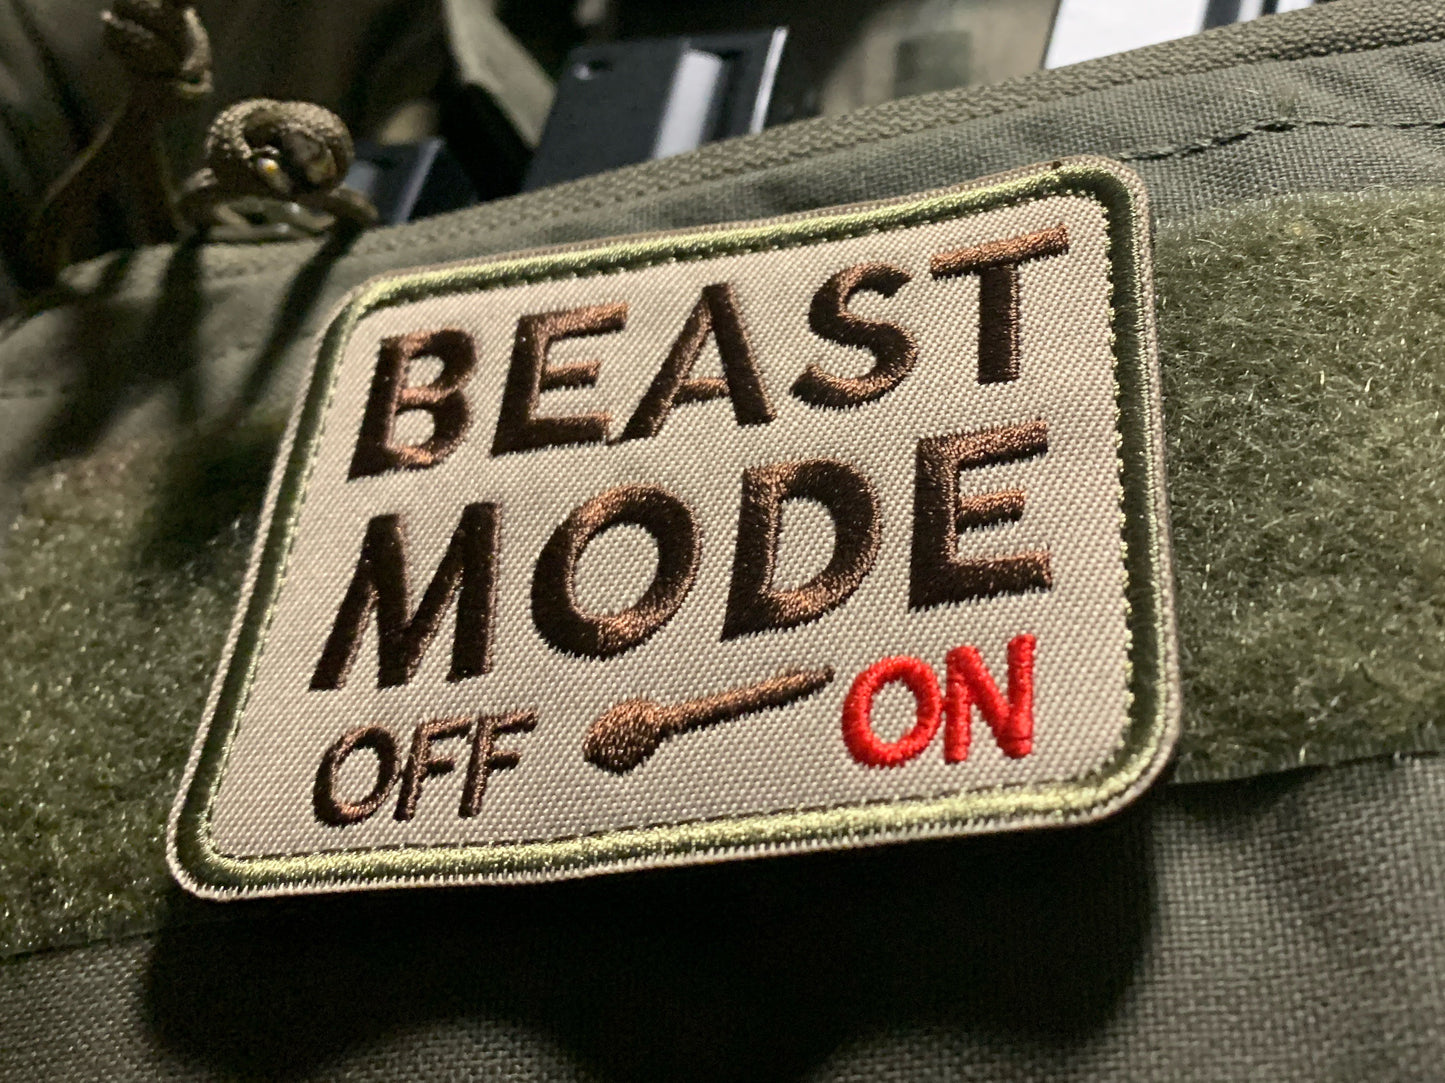 Beast Mode ON Patch